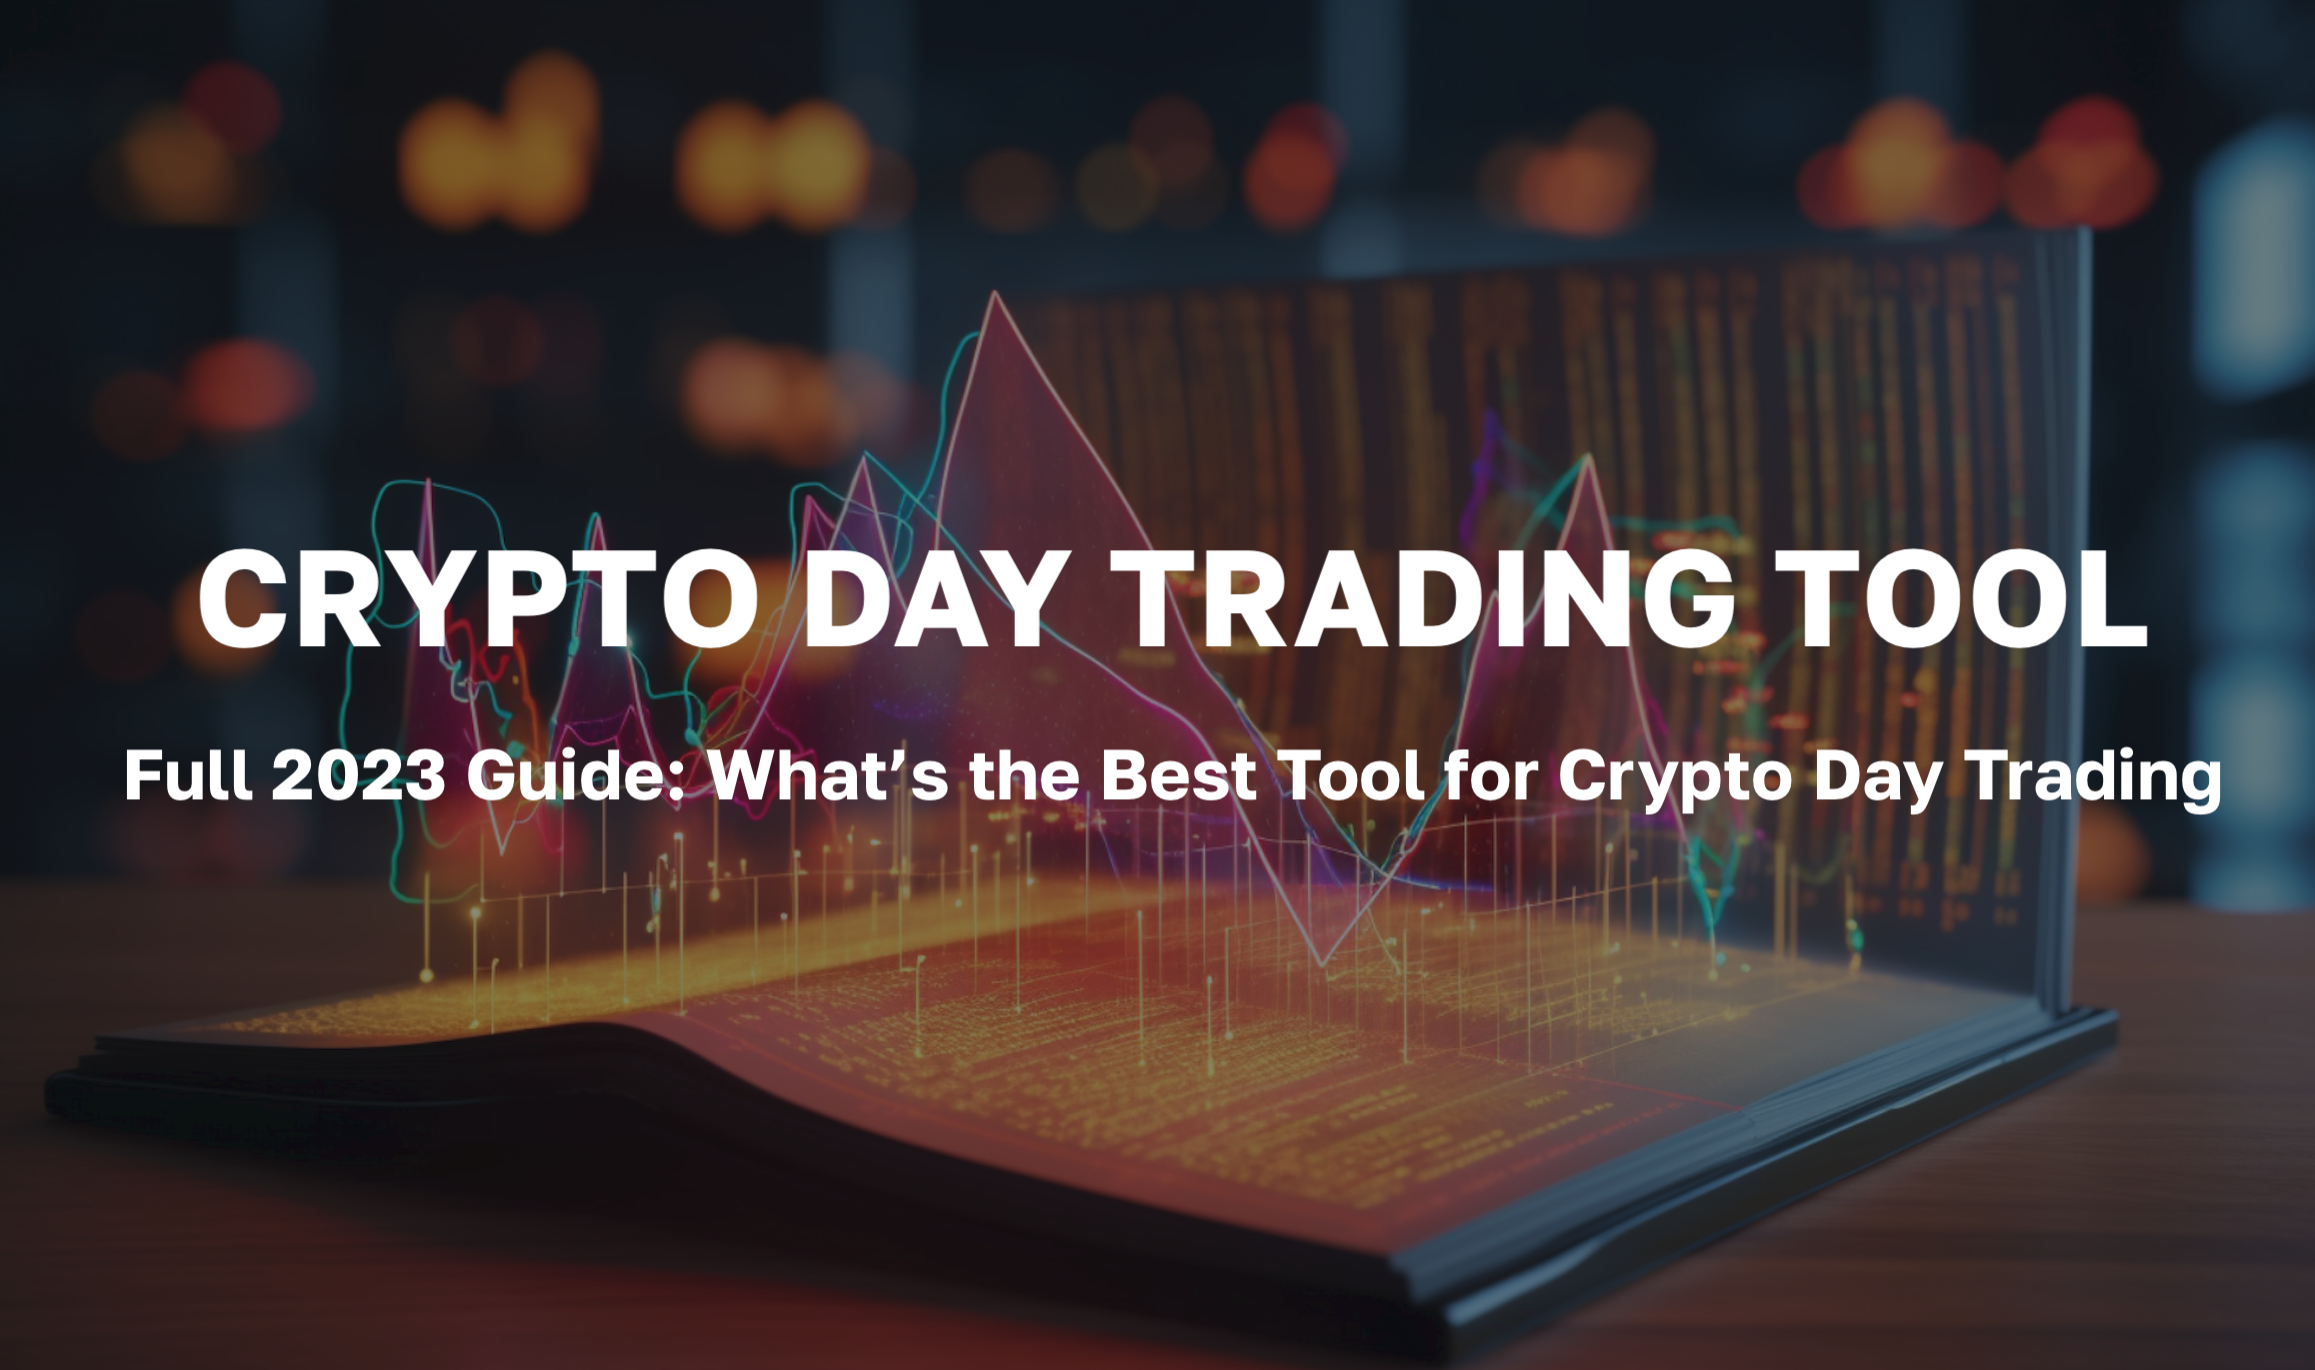 Full 2023 Guide/ What's the Best Tool for Crypto Day Trading